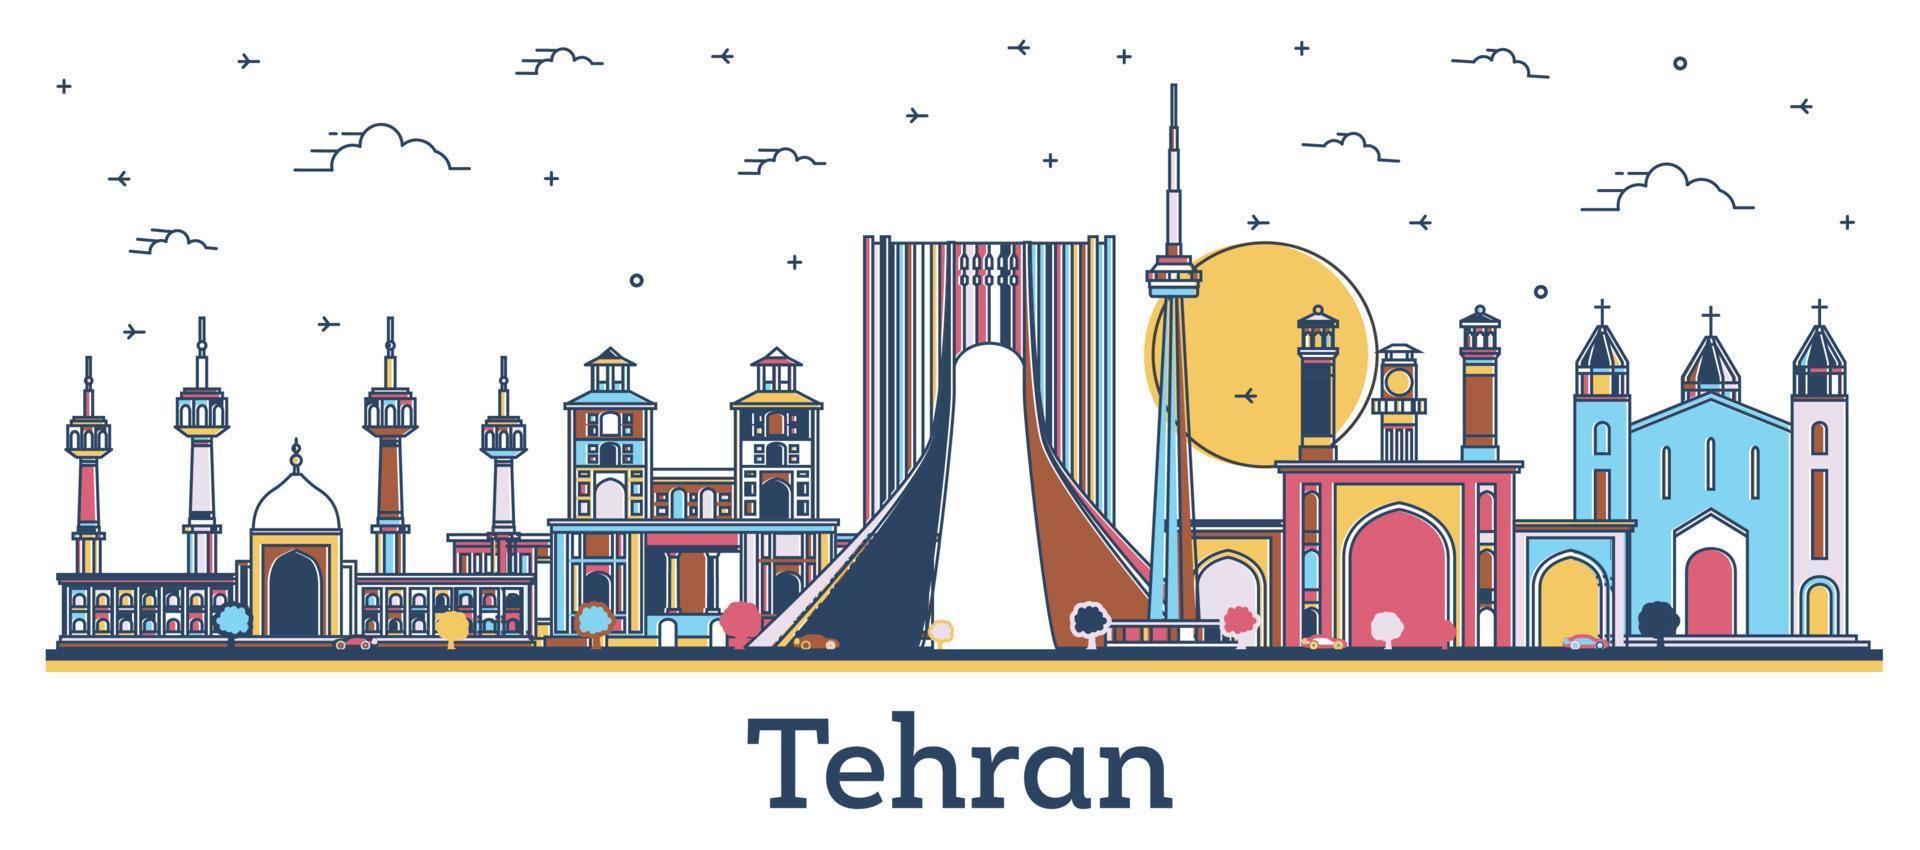 Outline Tehran Iran City Skyline with Colored Historic Buildings Isolated on White. vector